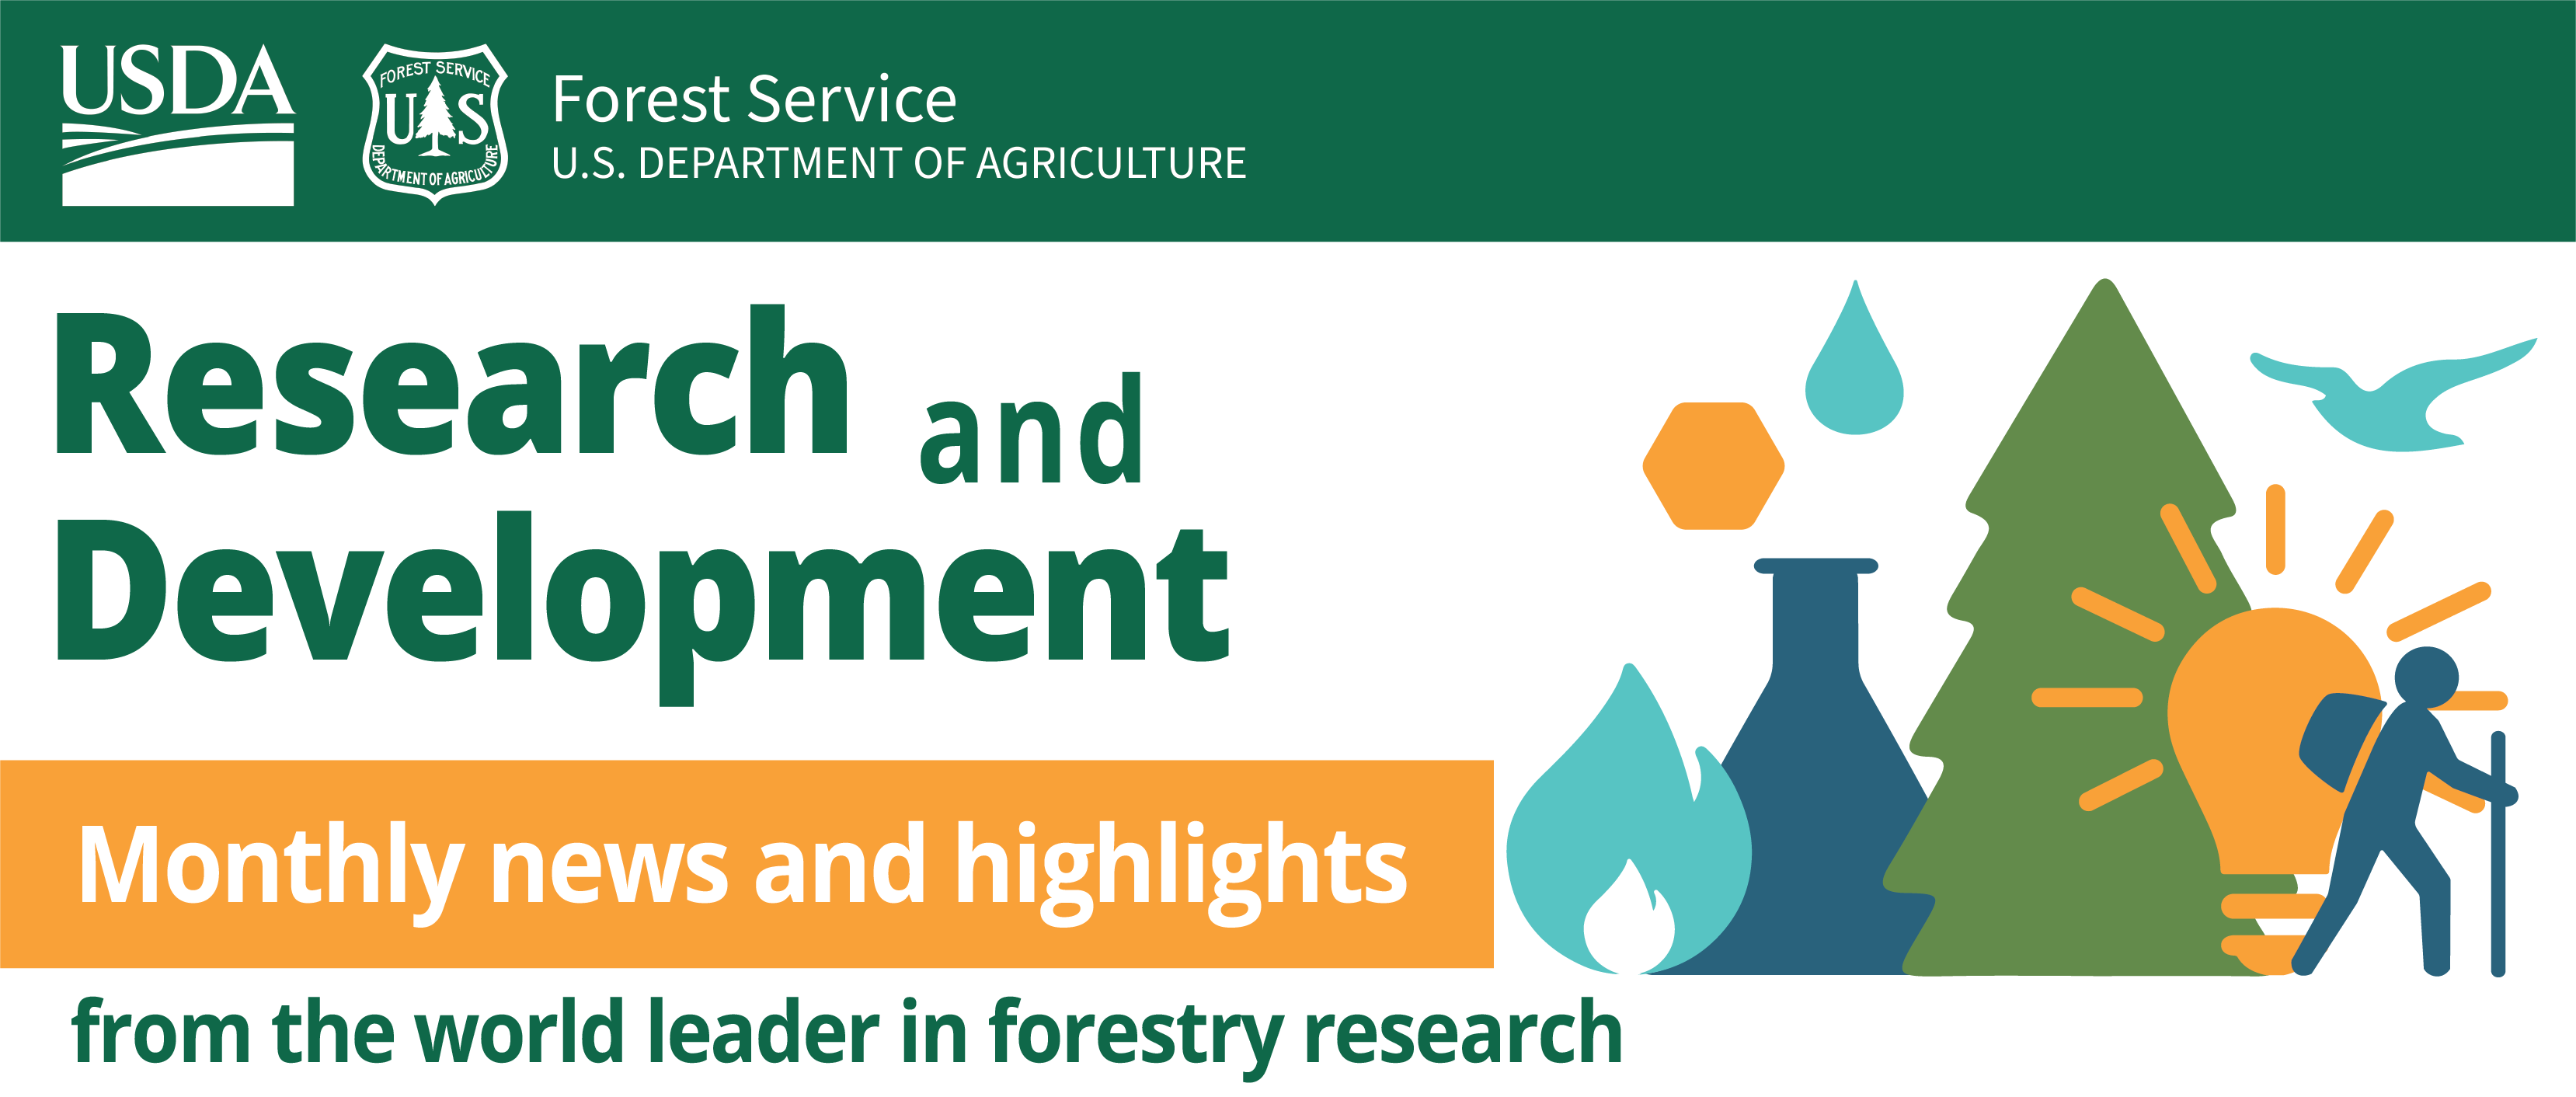 U.S. Forest Service Research and Development Monthly News and Highlights